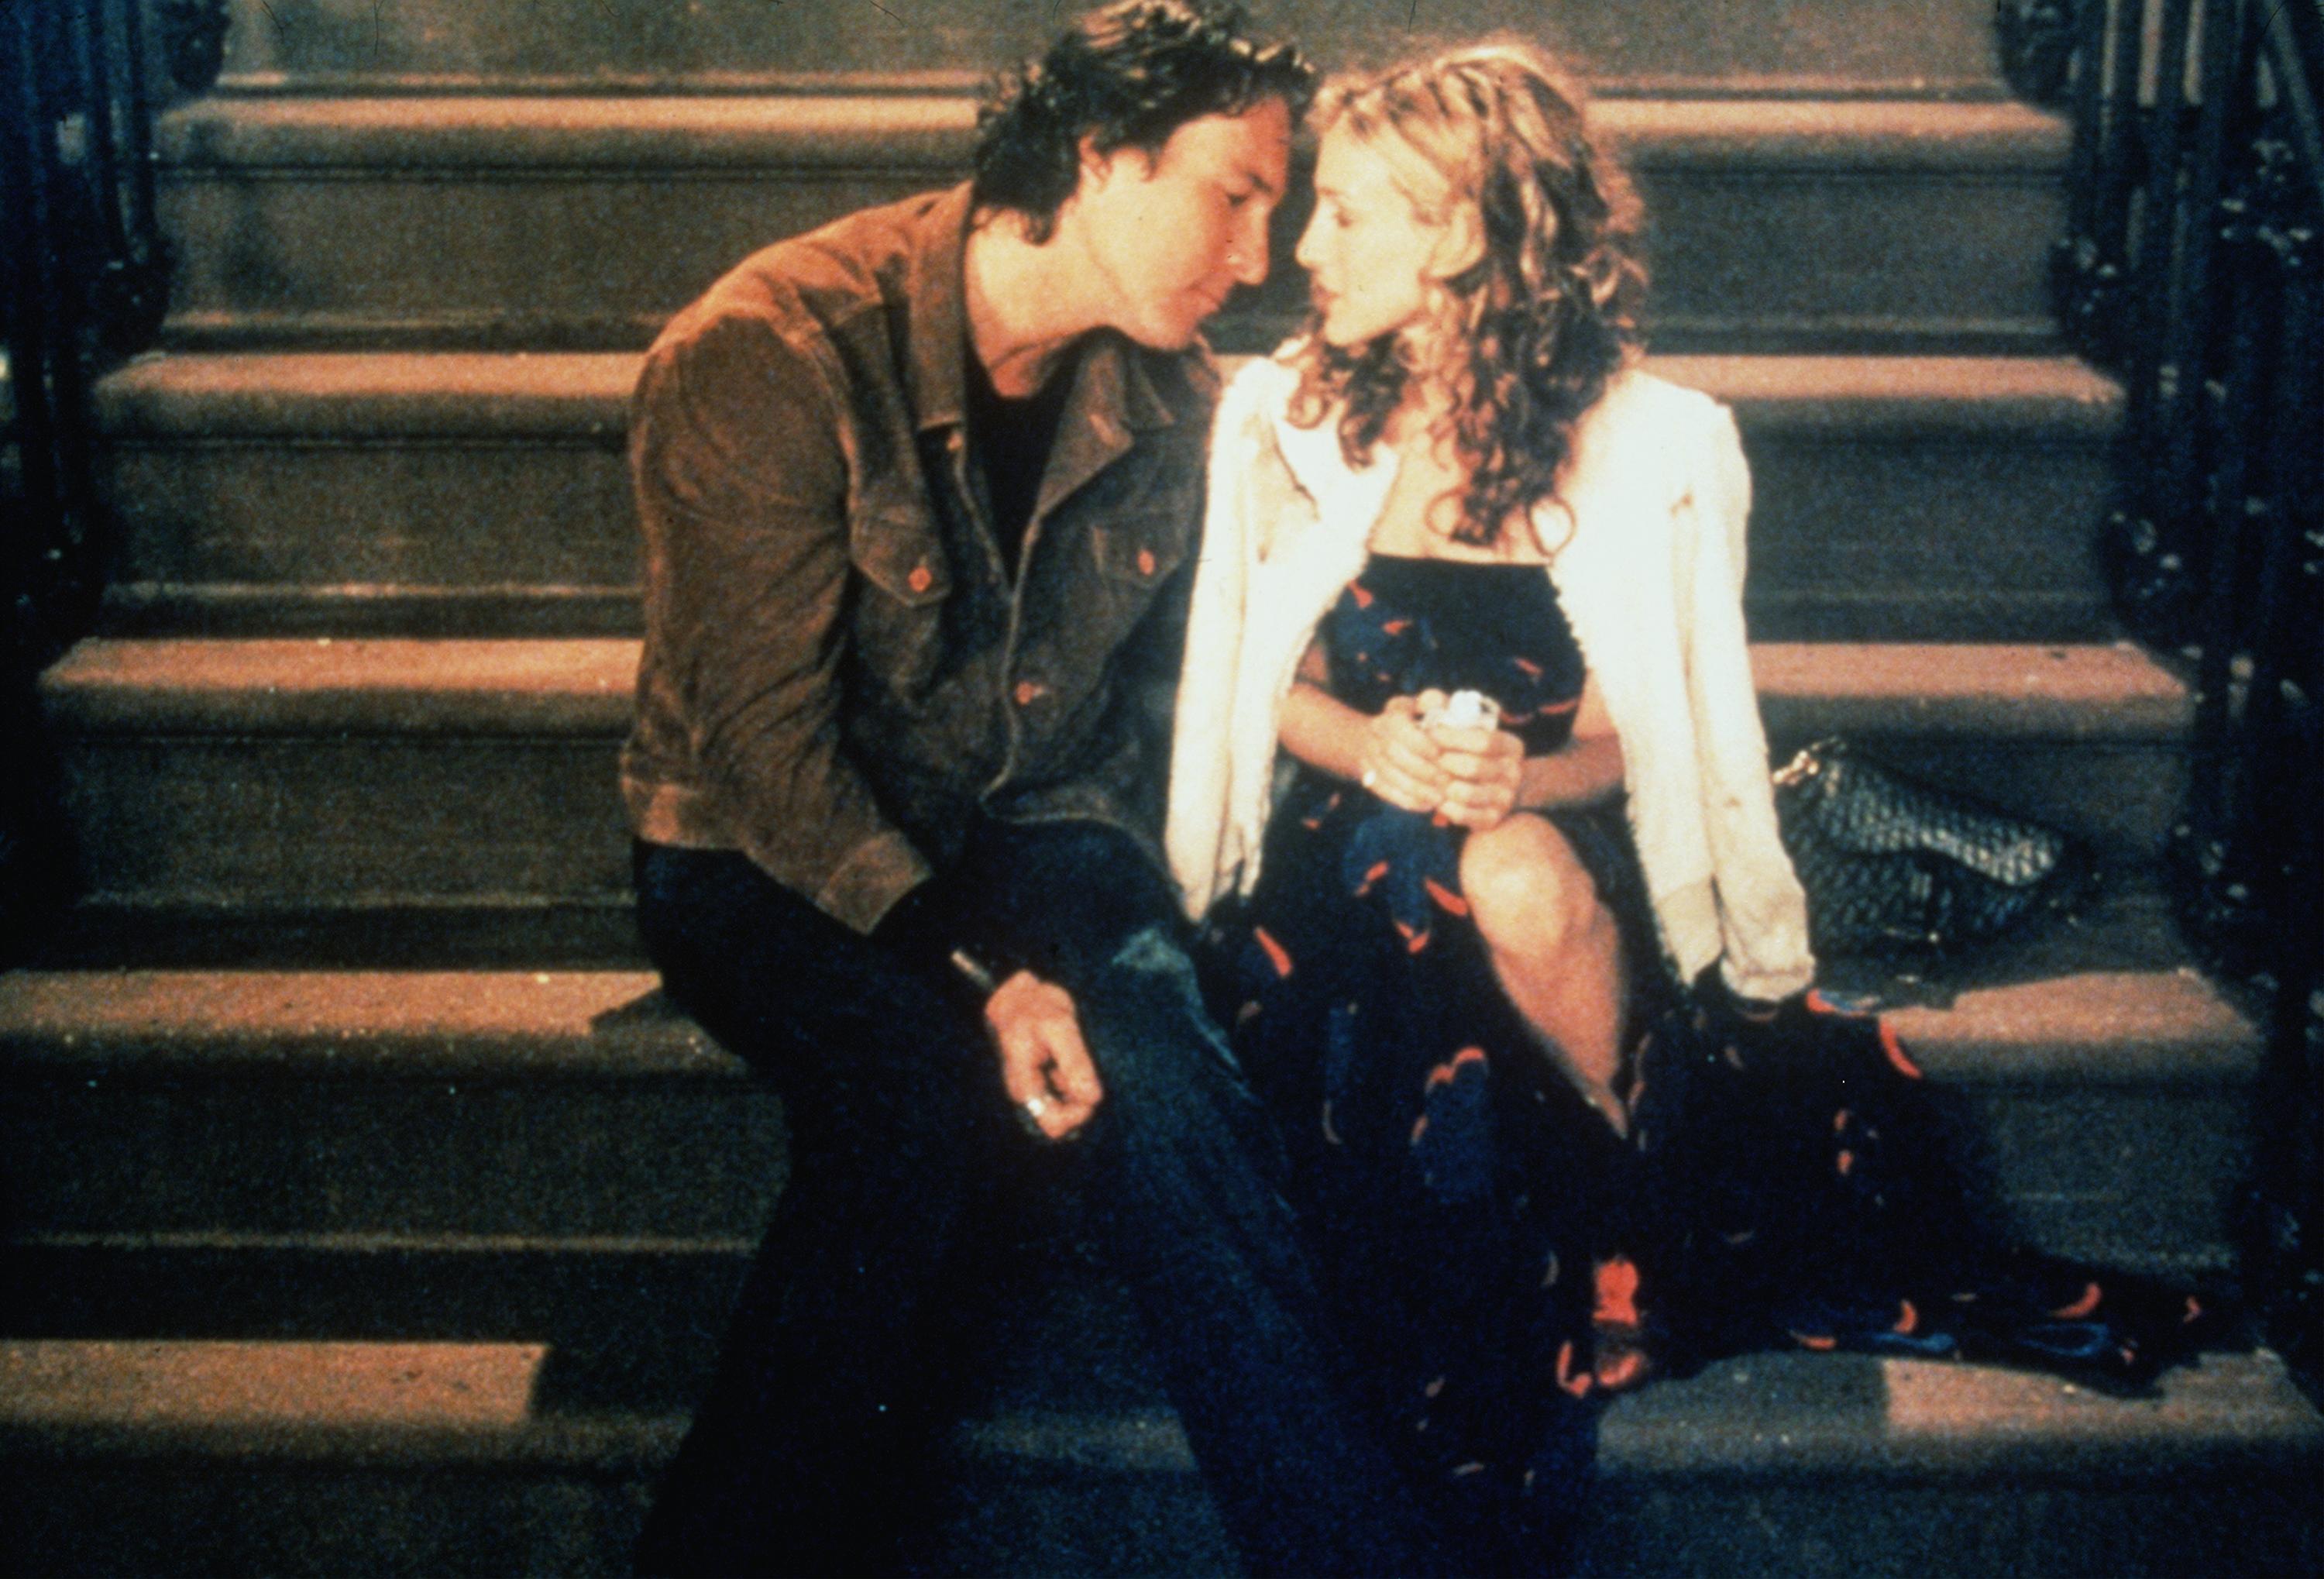 John Corbett as Aidan Shaw and Sarah Jessica Parker a Carrie Bradshaw in 'Sex and the City'